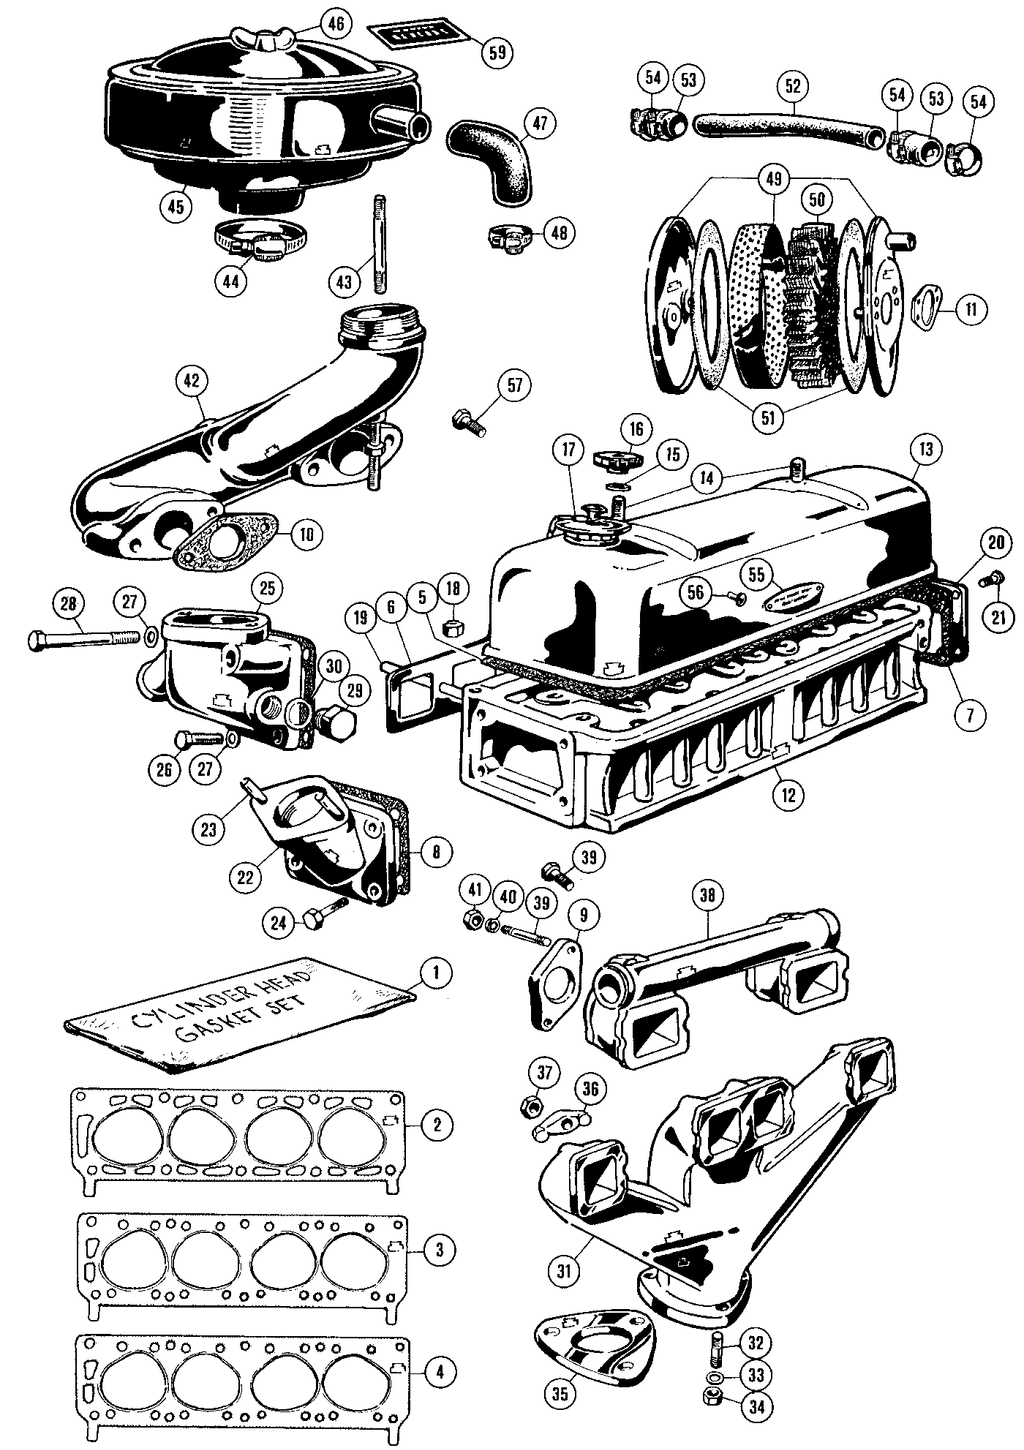 MGTD-TF 1949-1955 - Air induction systems - 1